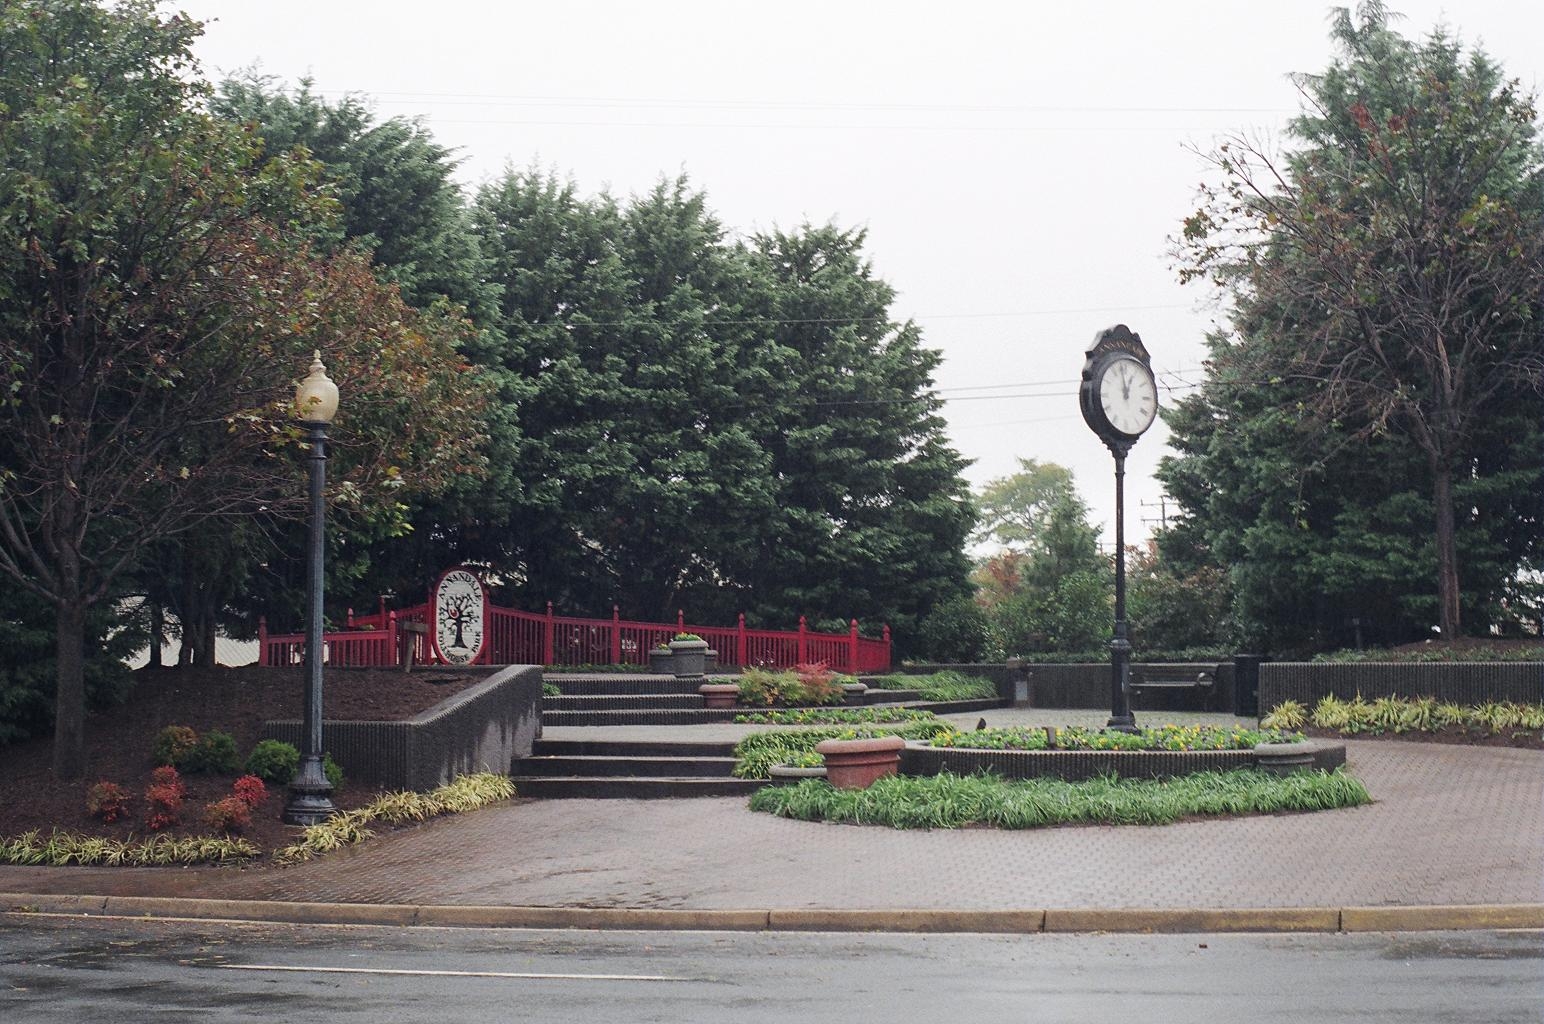 In 2015, one local property owner decided that he did not like the fullness of the trees at Toll House Park as it obscured the view of Columbia Pike and the buildings there.  Twice he had the trees in the park limbed-up and the beautiful 7' high Red Tipped Phoetinias bushes hacked back to just a foot high.  Consequently, the sound barrier that the shrubs had provided is gone and it is impossible to carry on a conversation with the din of traffic noise.  Obviously, it is not permissible for private individuals to go into parks and hack away at the vegetation.  